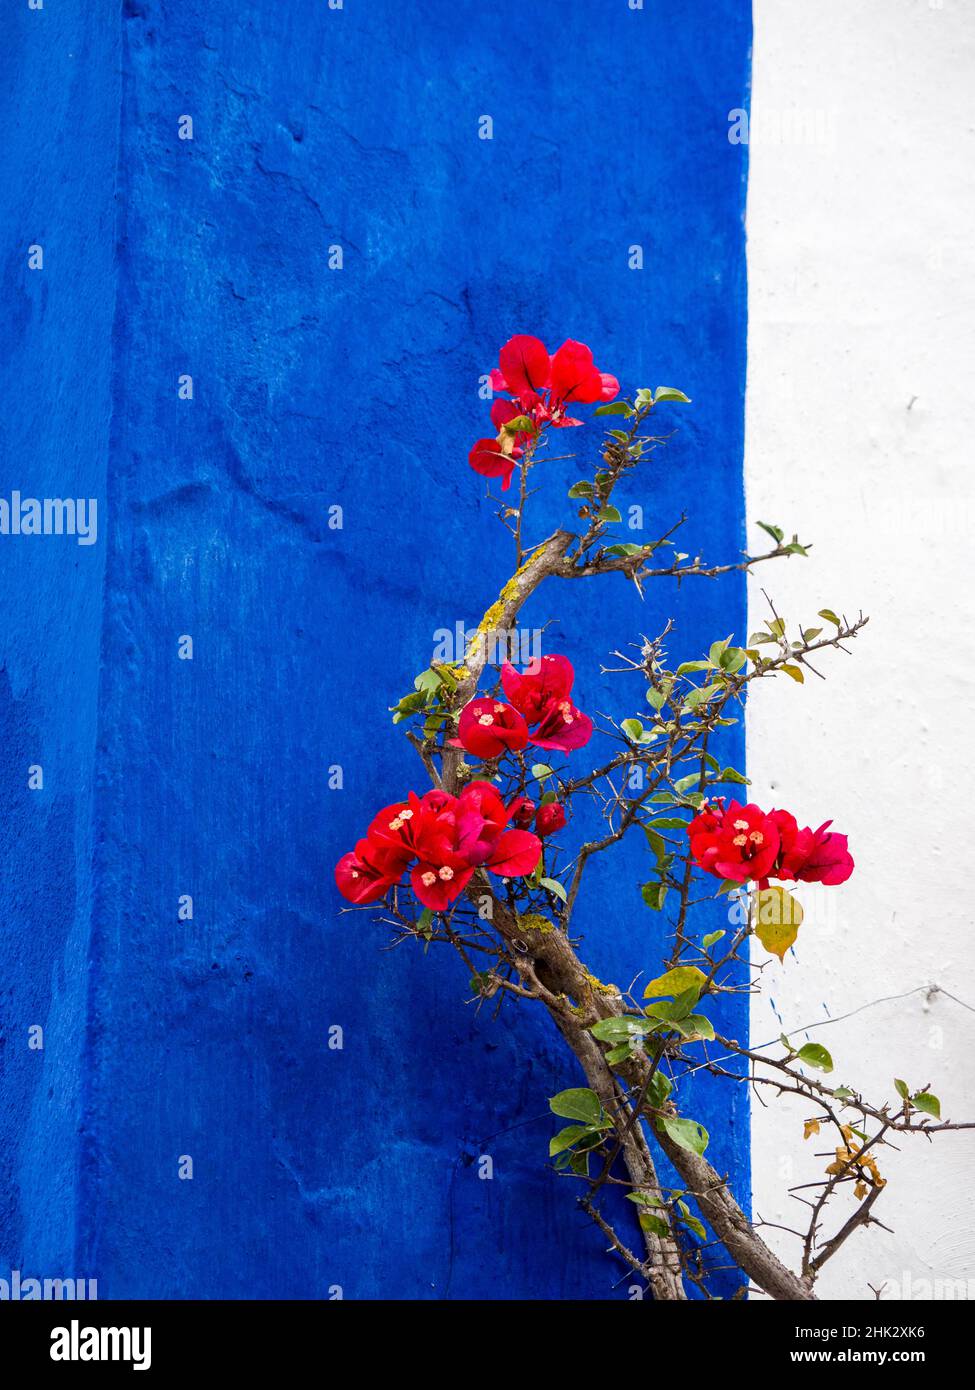 Portugal, Obidos. Red bougainvillea vine against a blue and white wall. Stock Photo